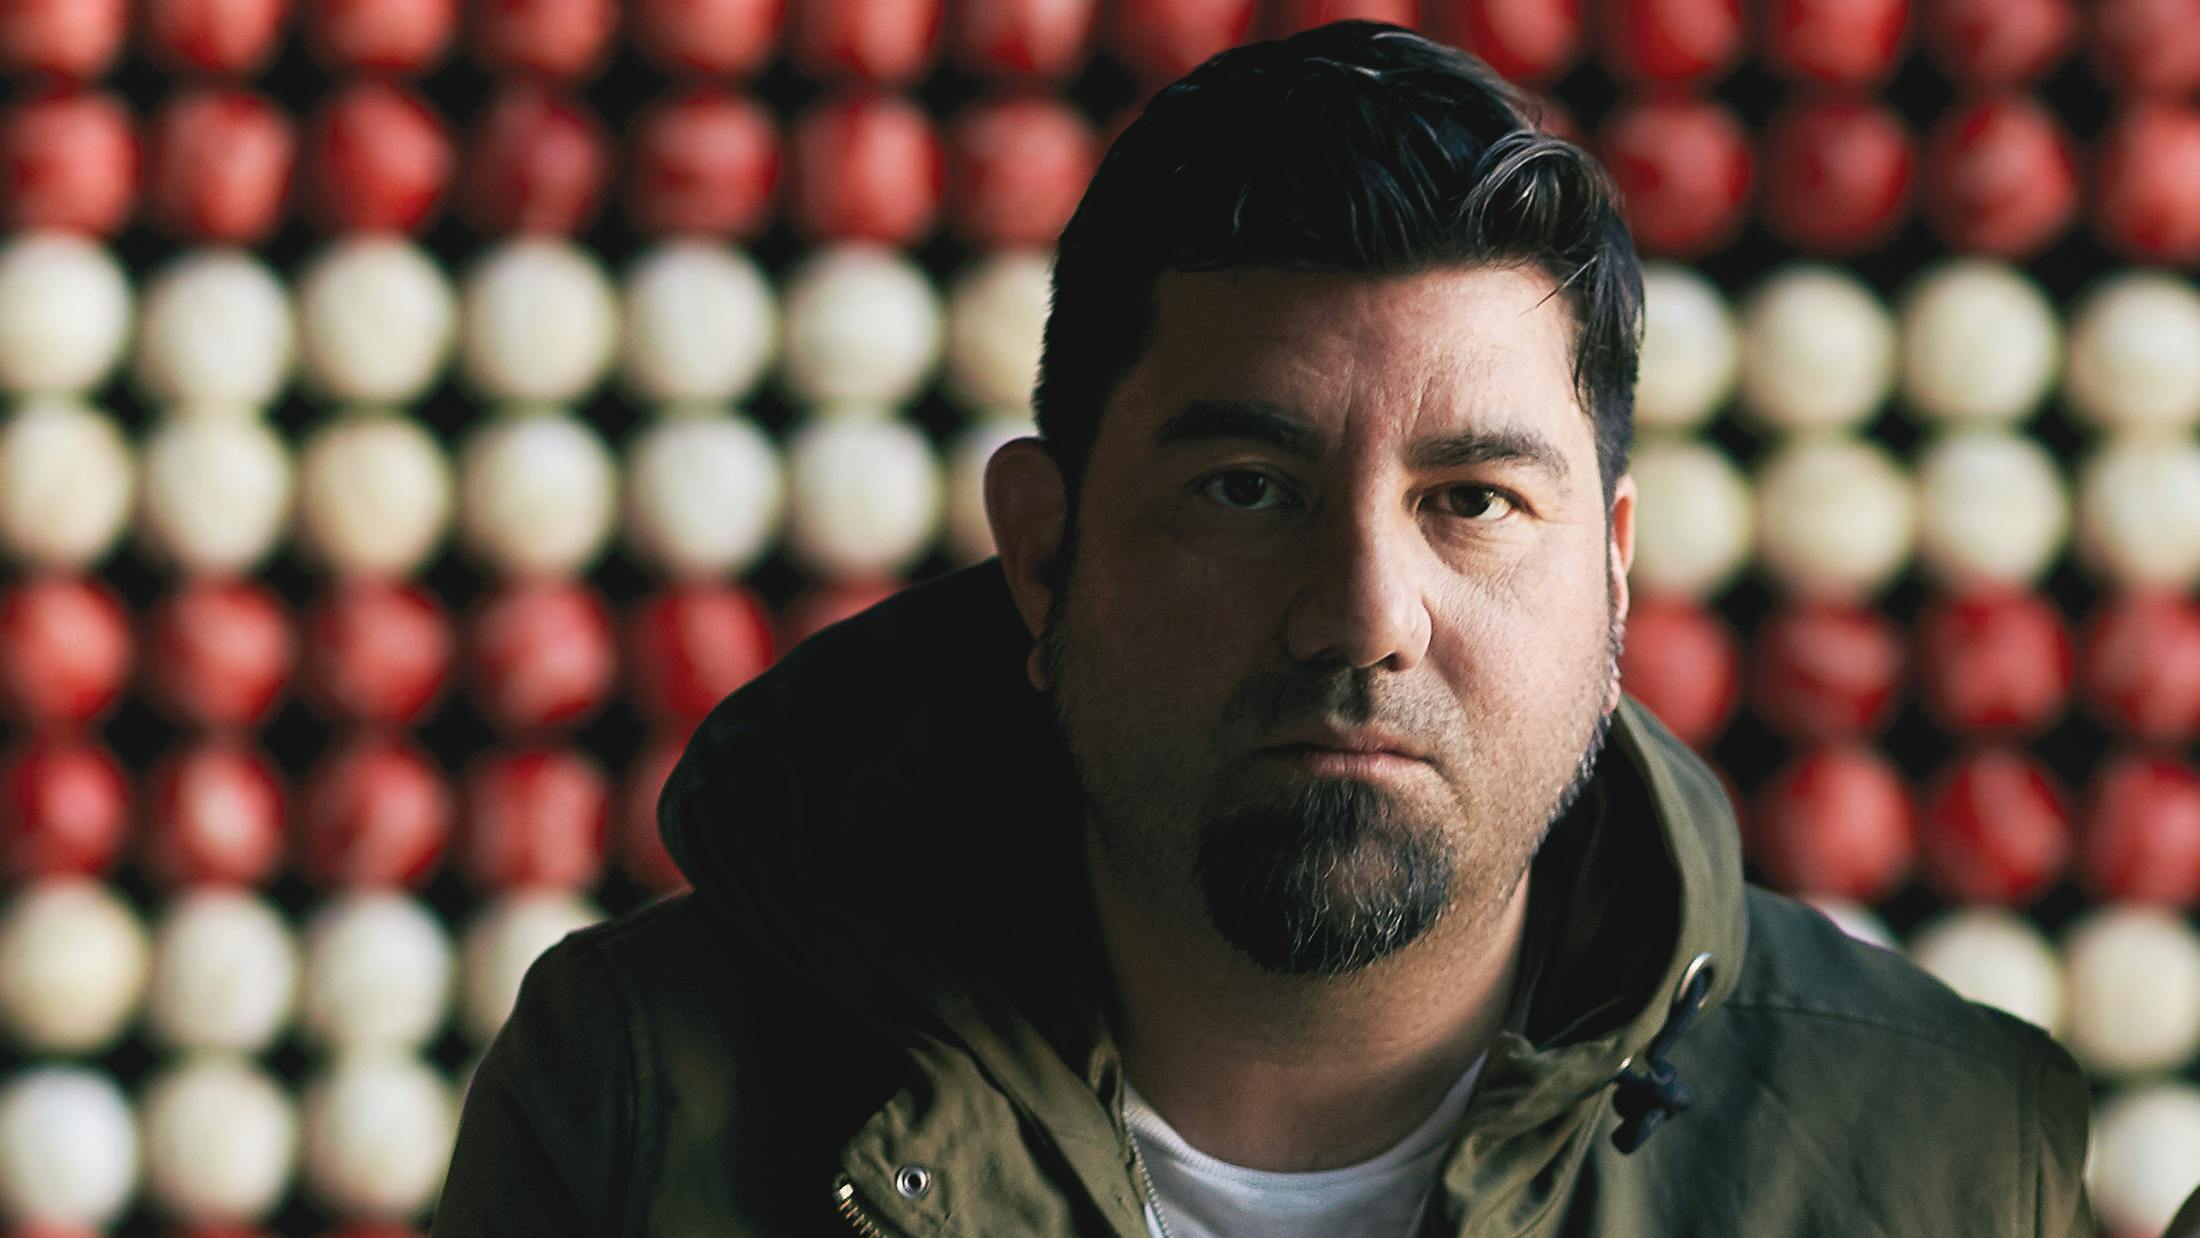 Chino Moreno On The Deftones Album That Will "Always" Be His Favourite